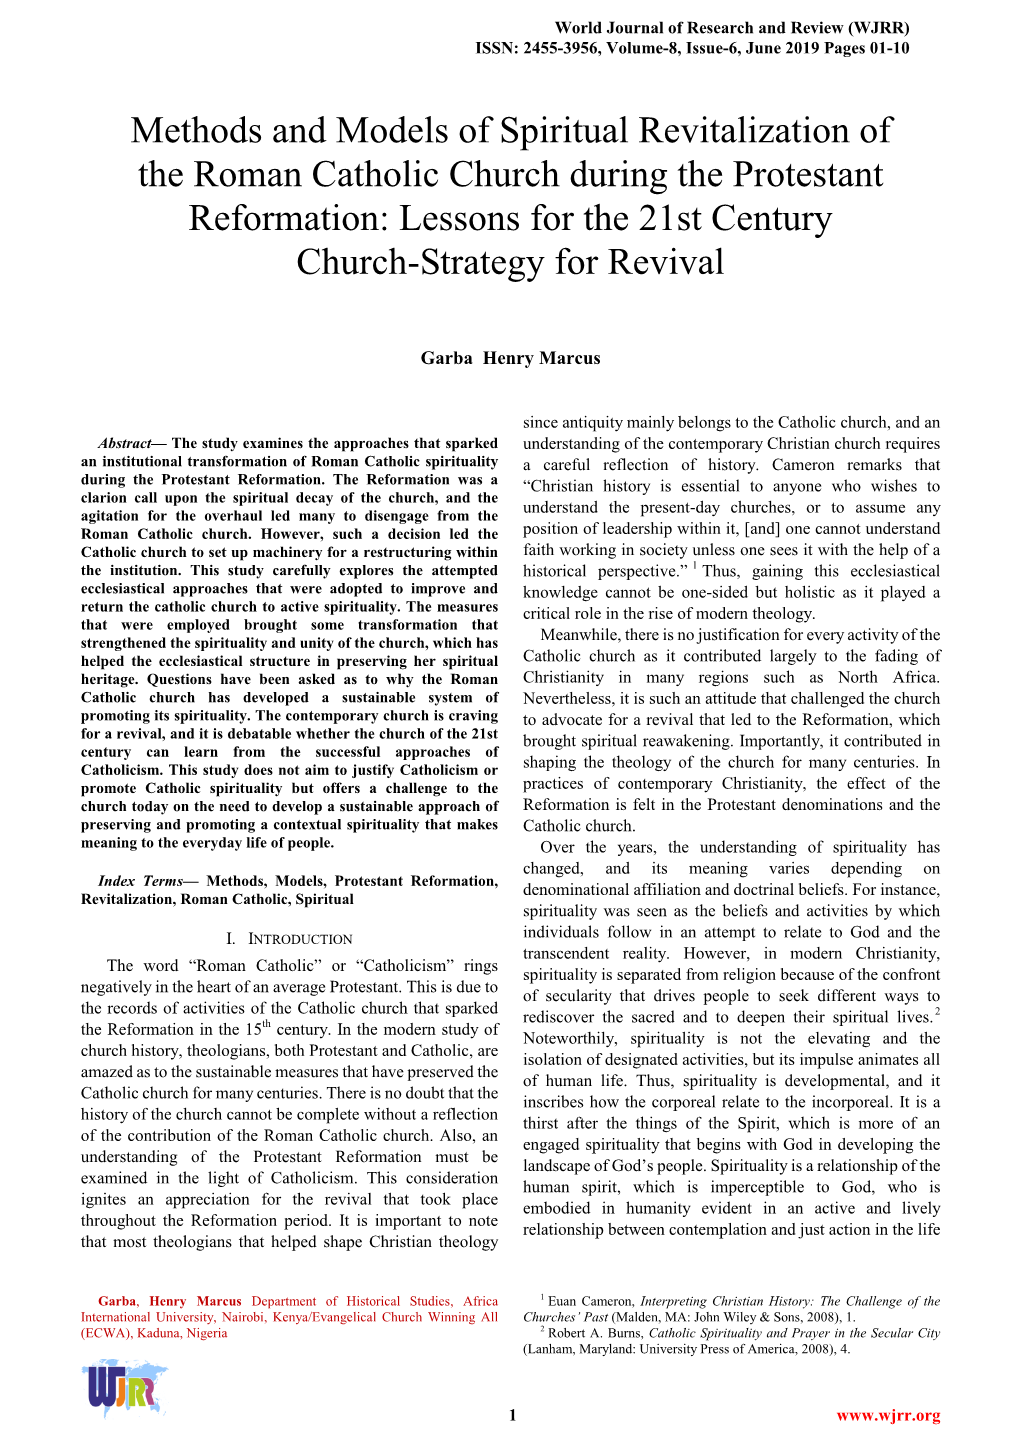 Methods and Models of Spiritual Revitalization of the Roman